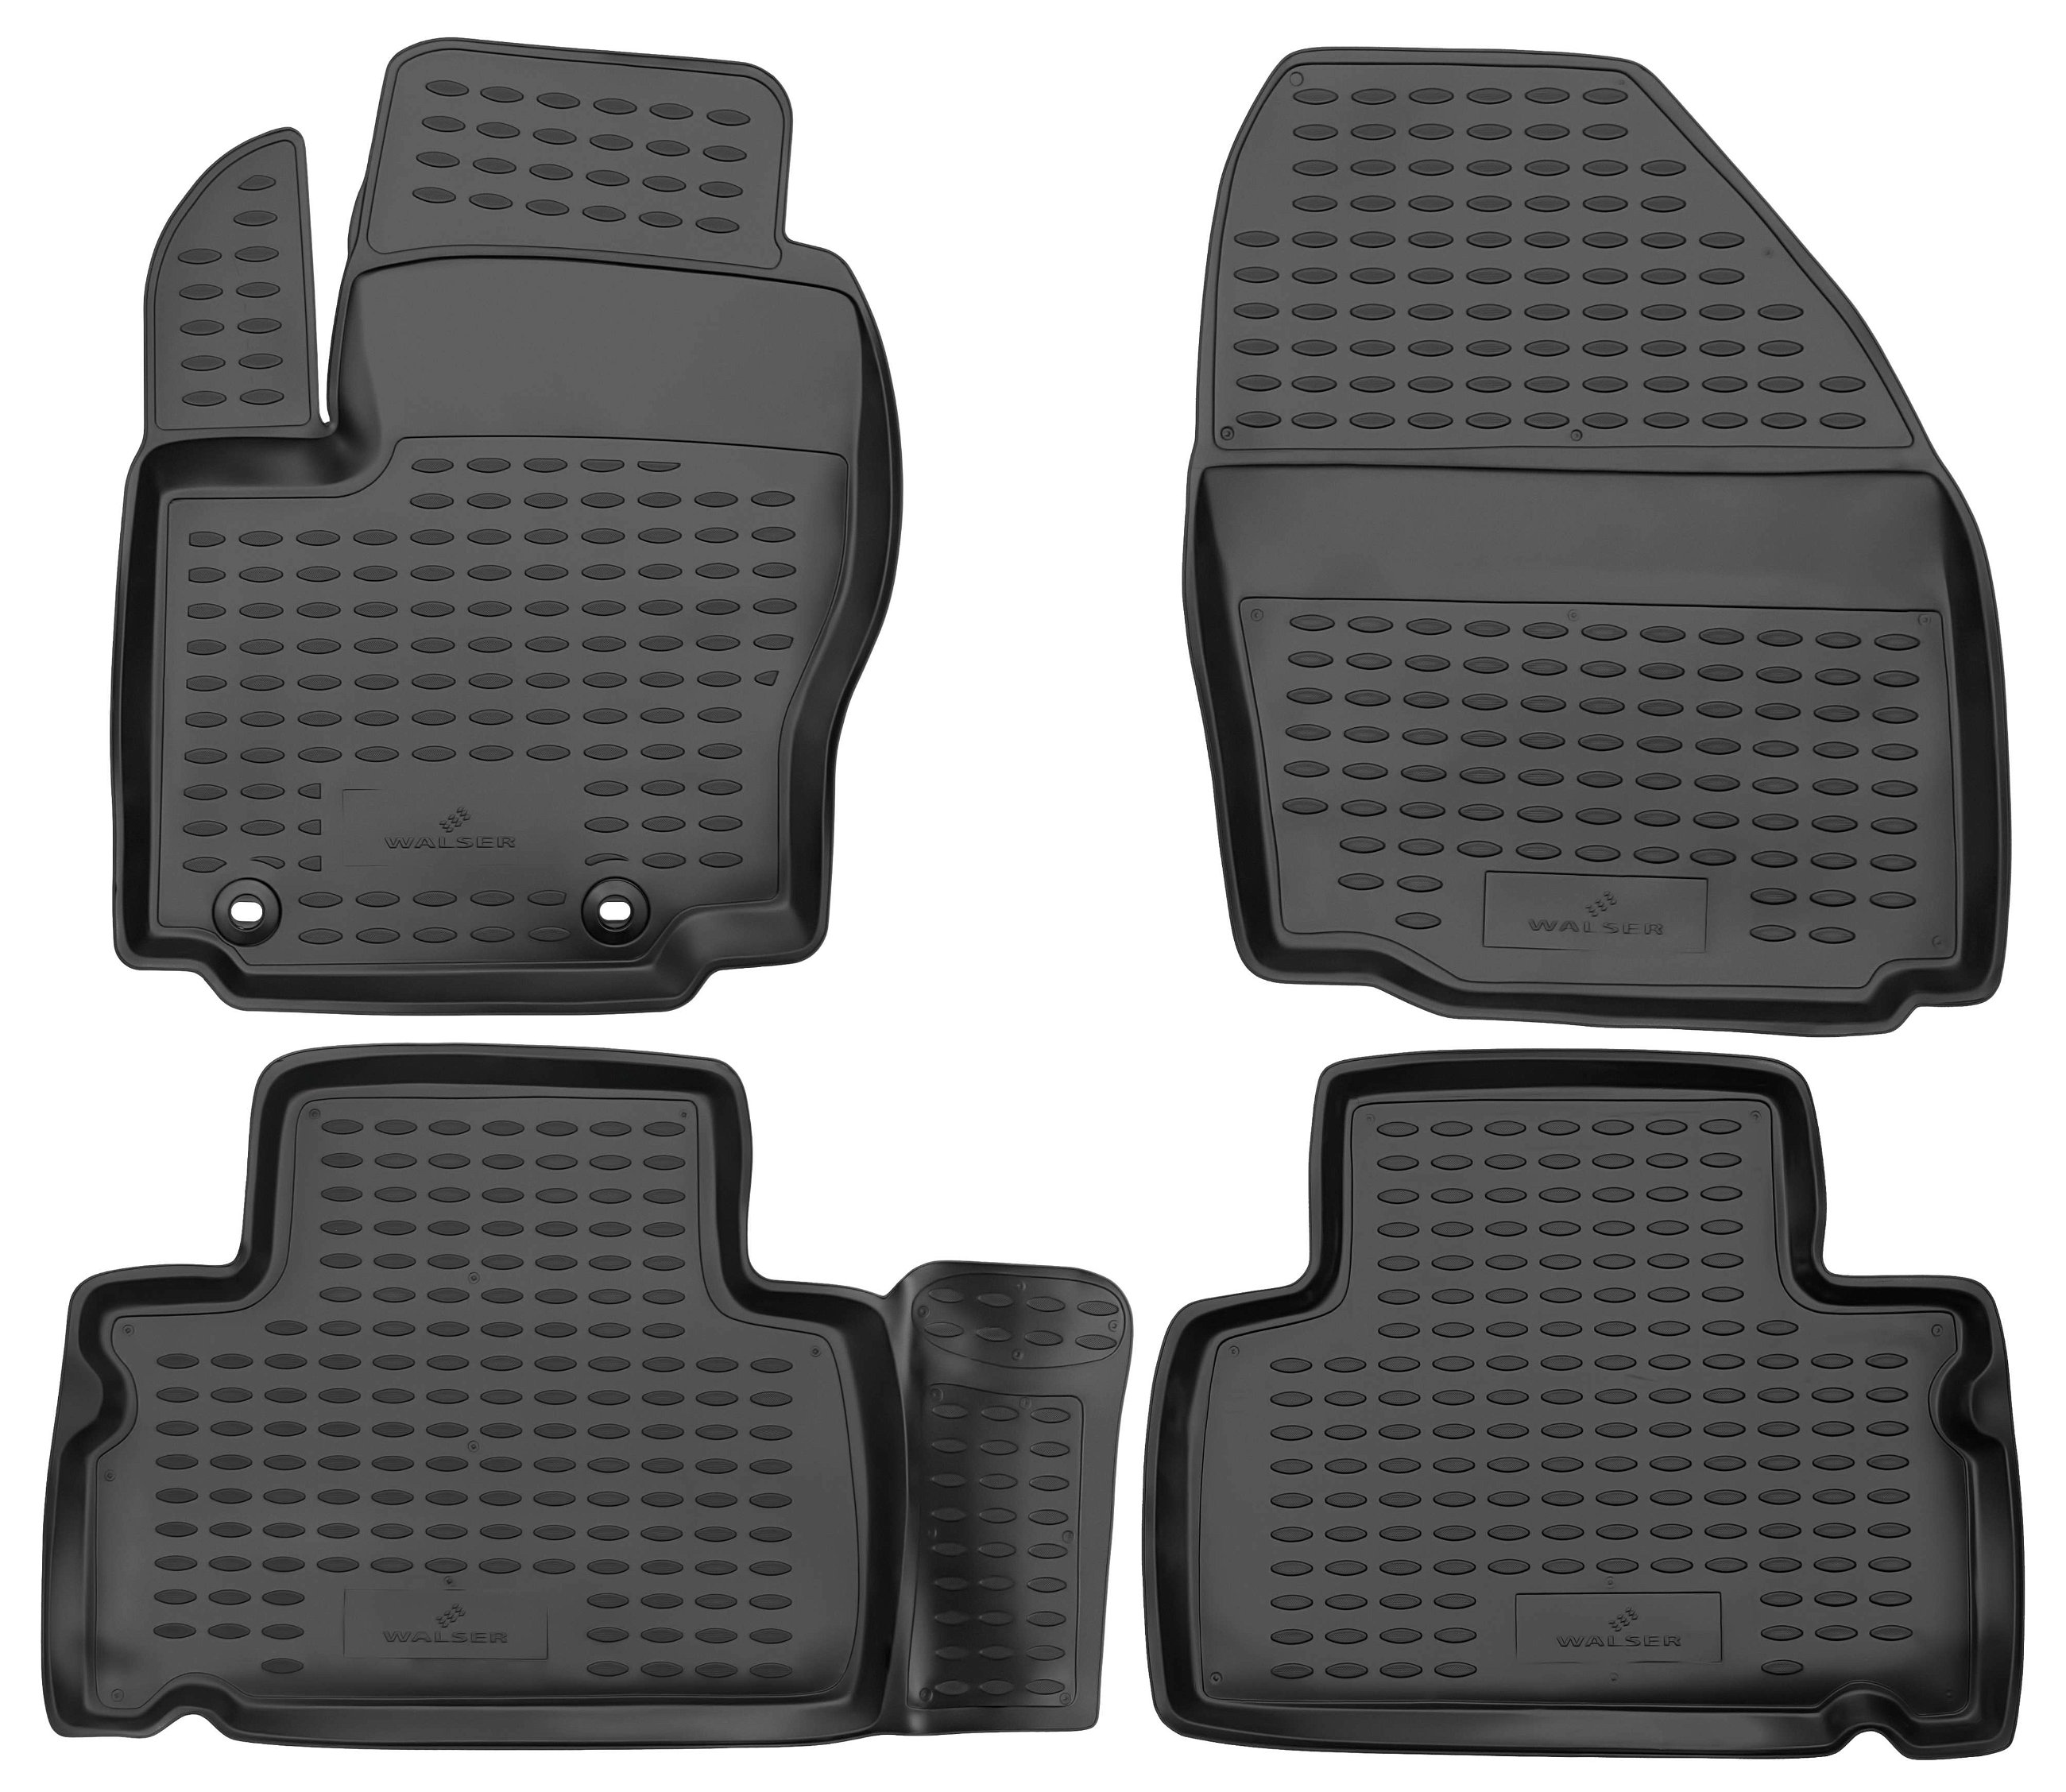 XTR Rubber Mats for Ford S-MAX (WA6) 05/2006 - 12/2014